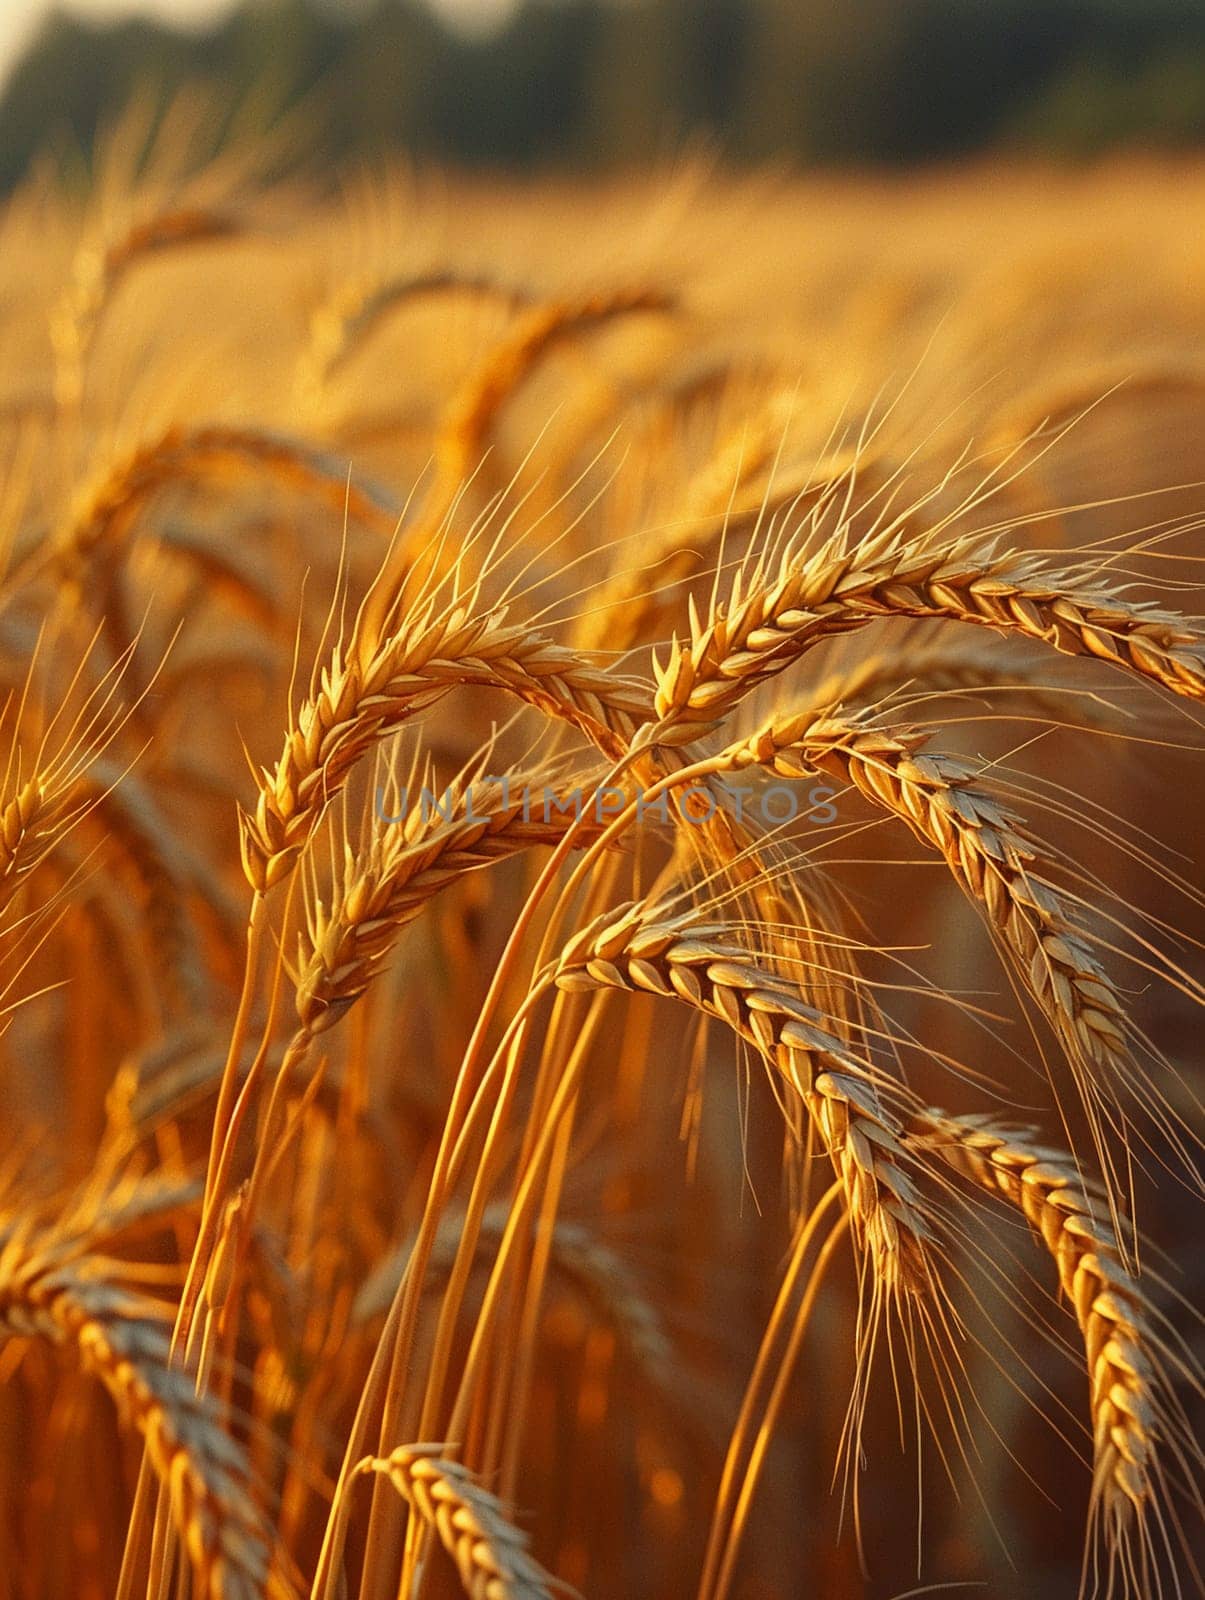 Golden wheat field swaying in the breeze, ideal for agricultural and country themes.